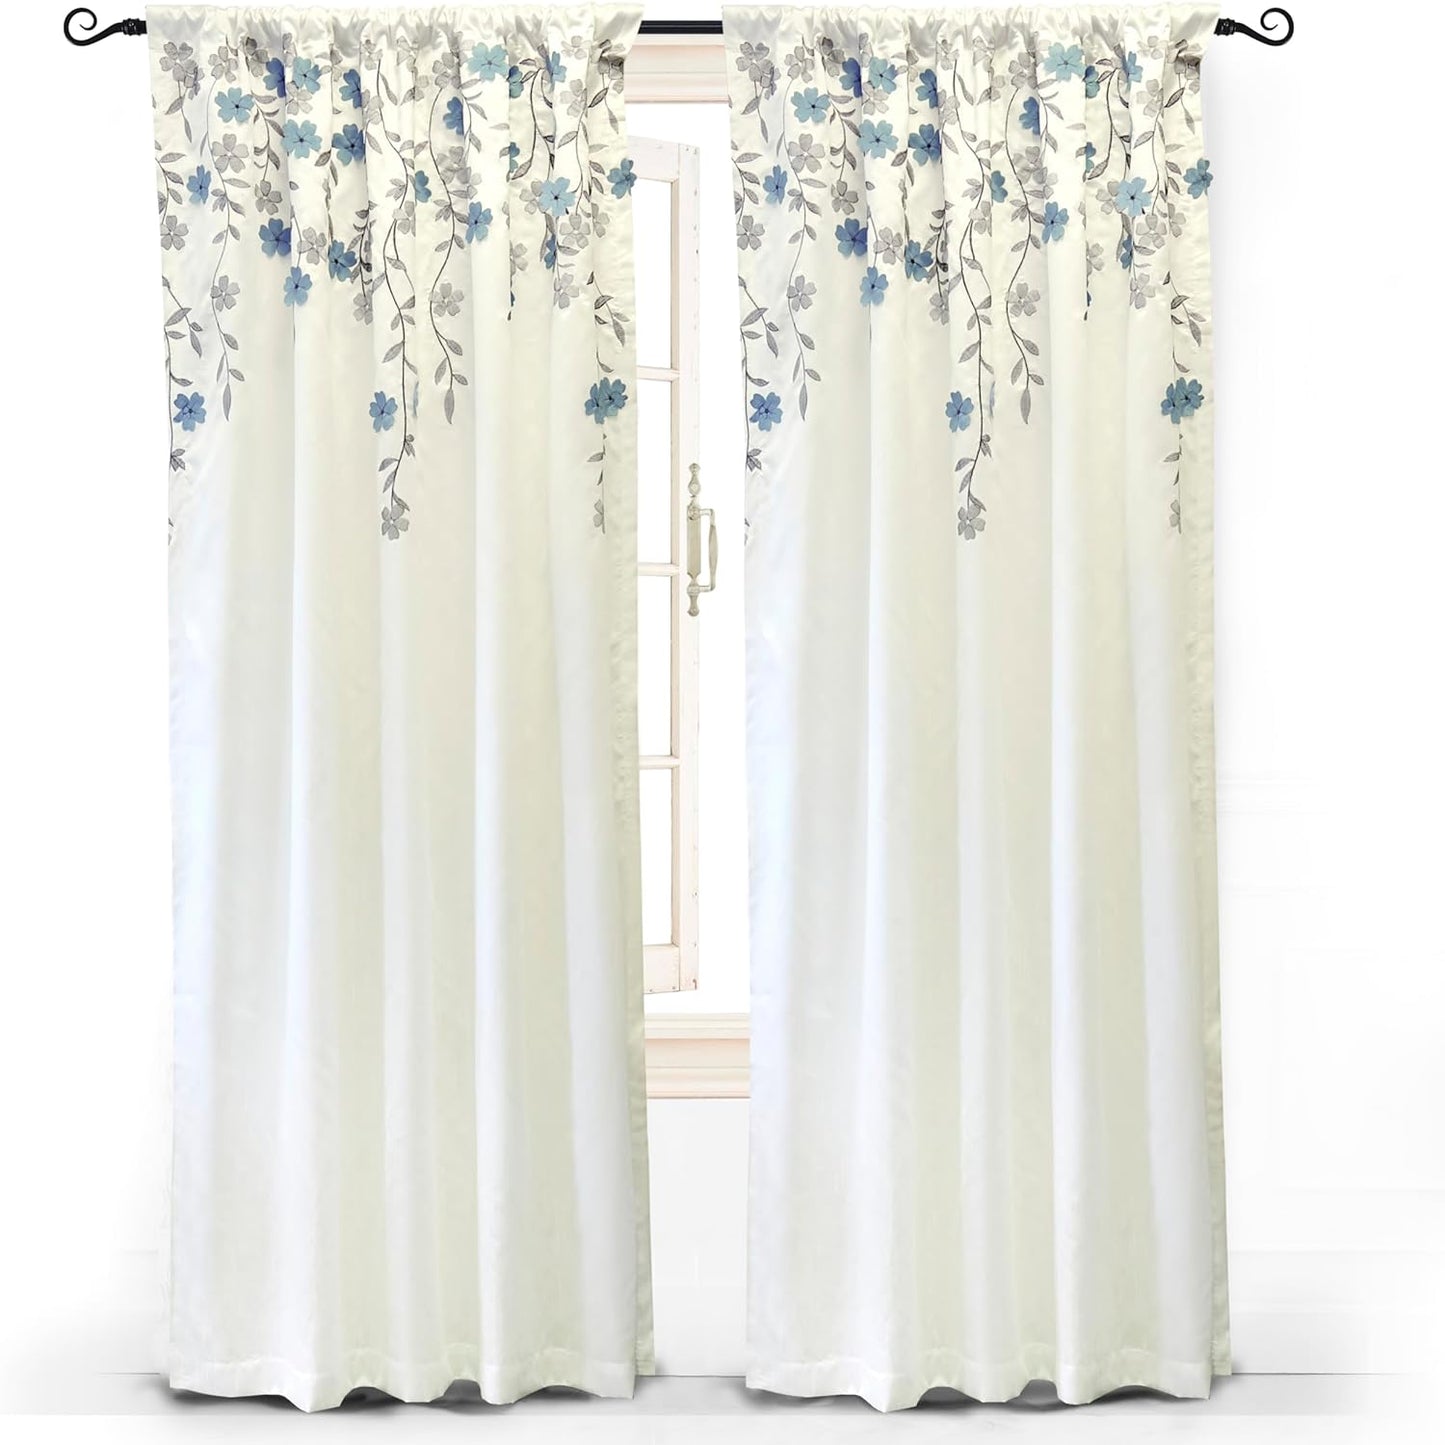 Driftaway Aubree Weeping Flower Print Thermal Room Darkening Privacy Window Curtain for Bedroom Living Room Rod Pocket 2 Panels 52 Inch by 84 Inch Blue  DriftAway One Panel Ivory Blue 50"X108" 